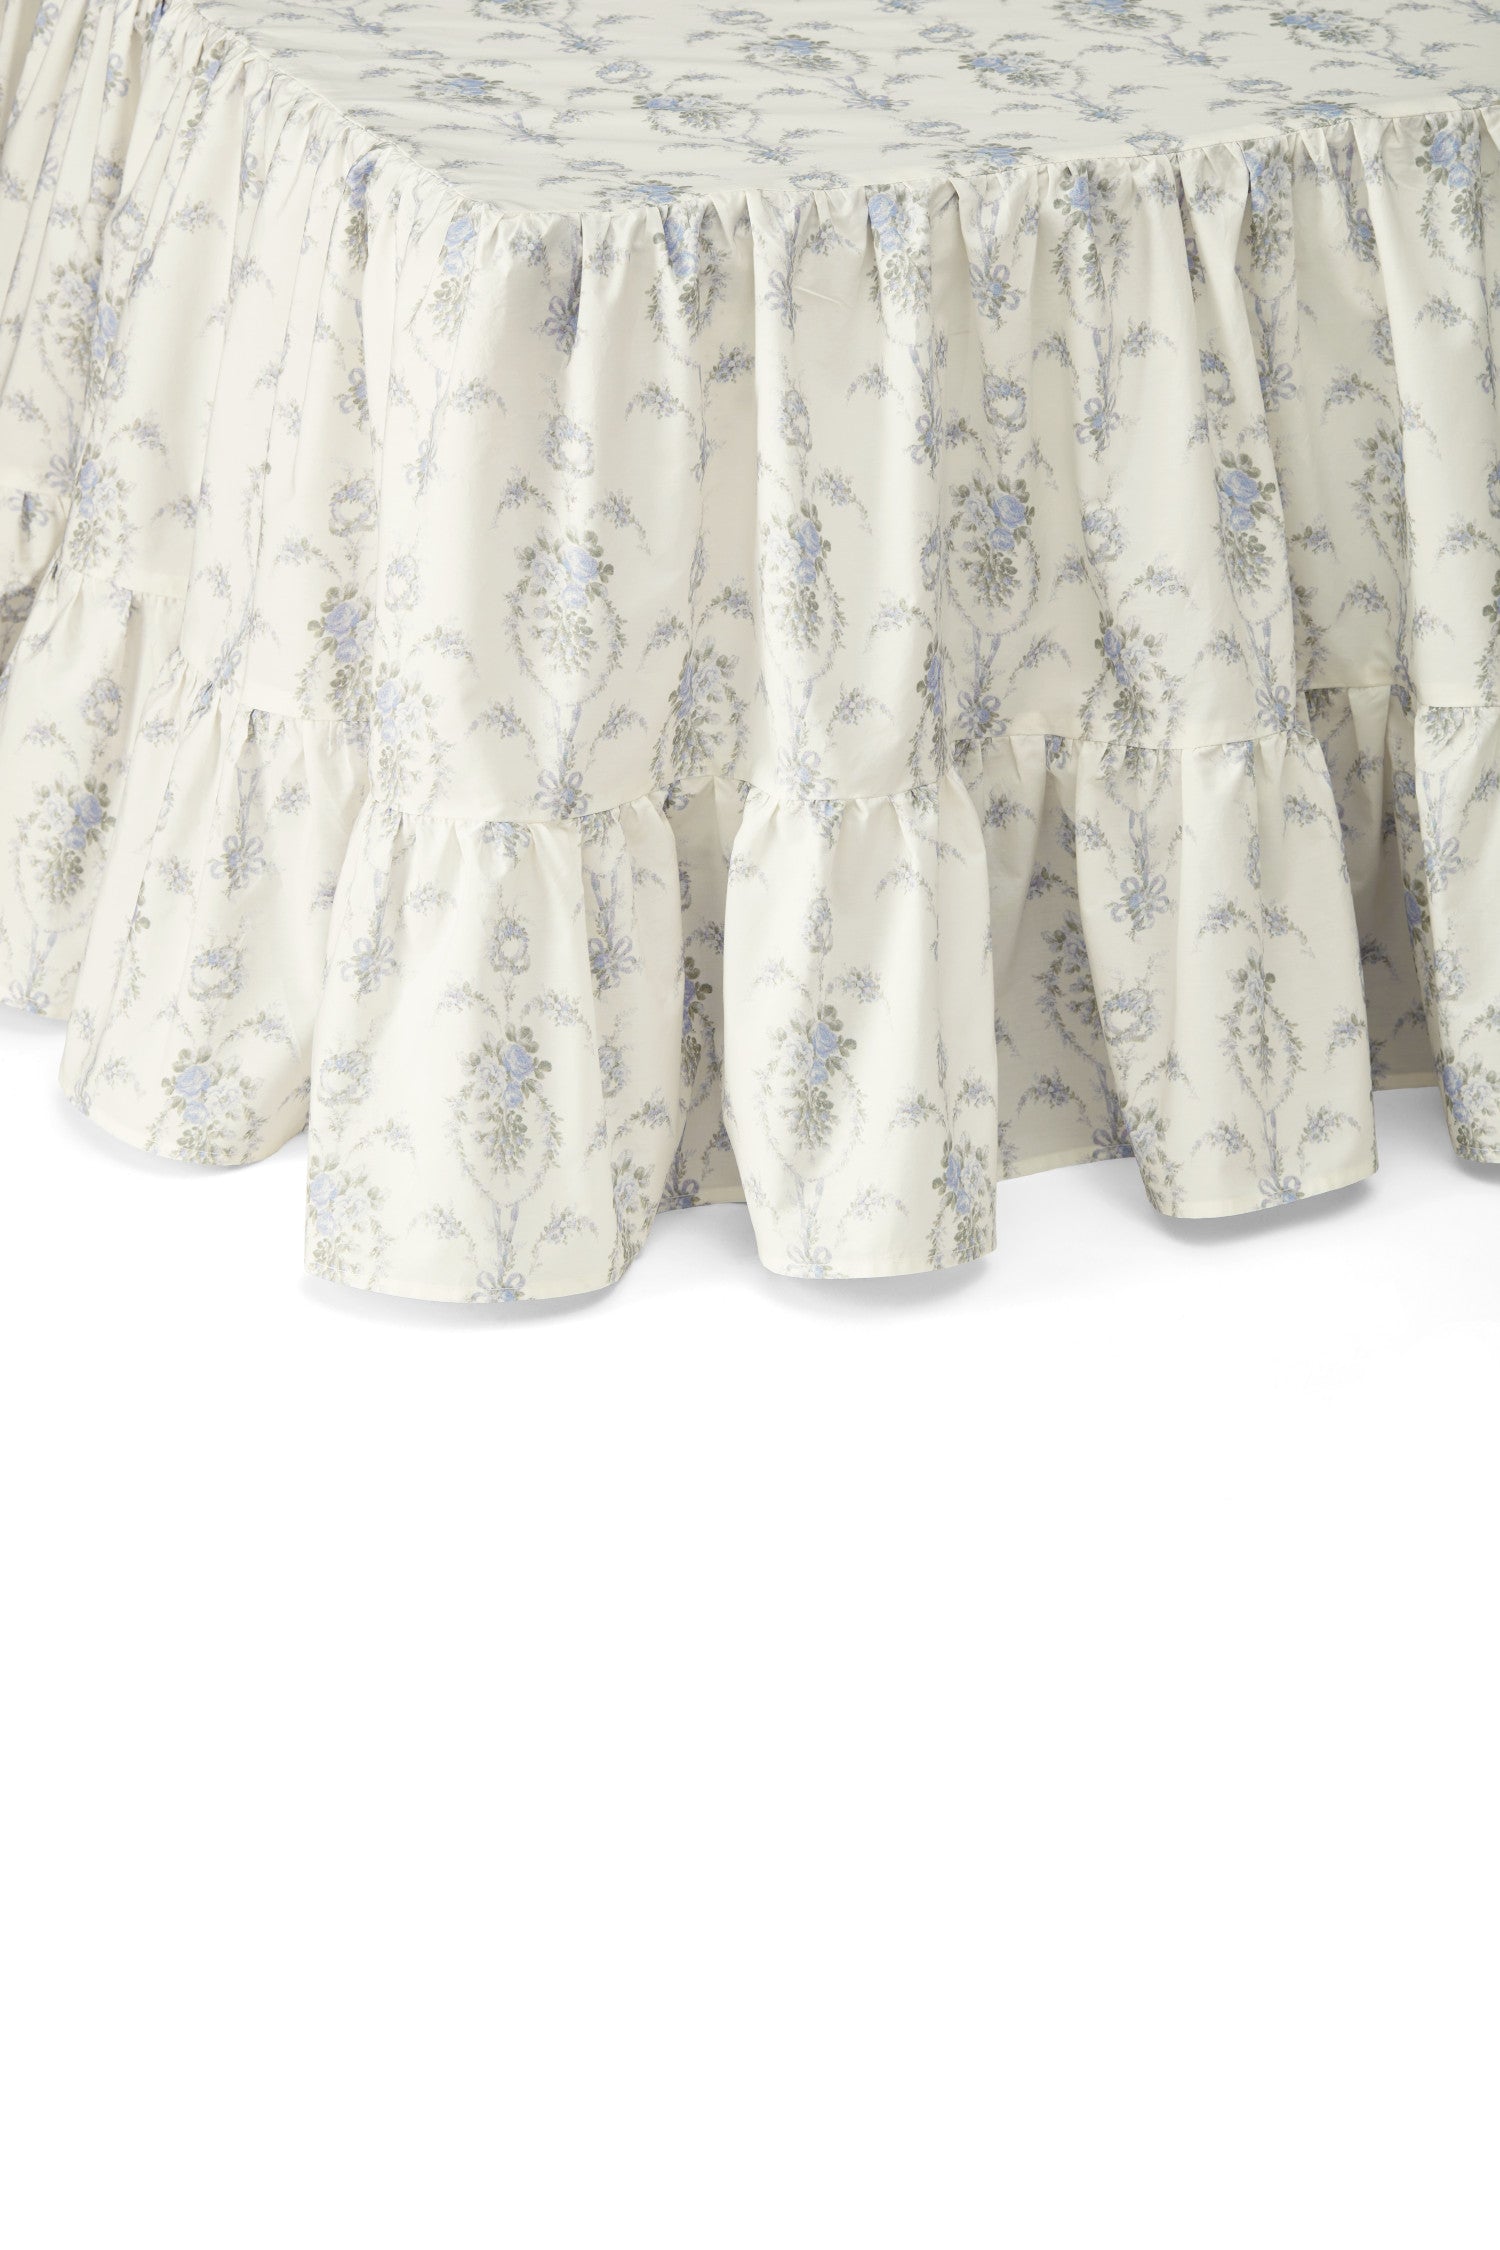 Blue floral ruffle bed skirt